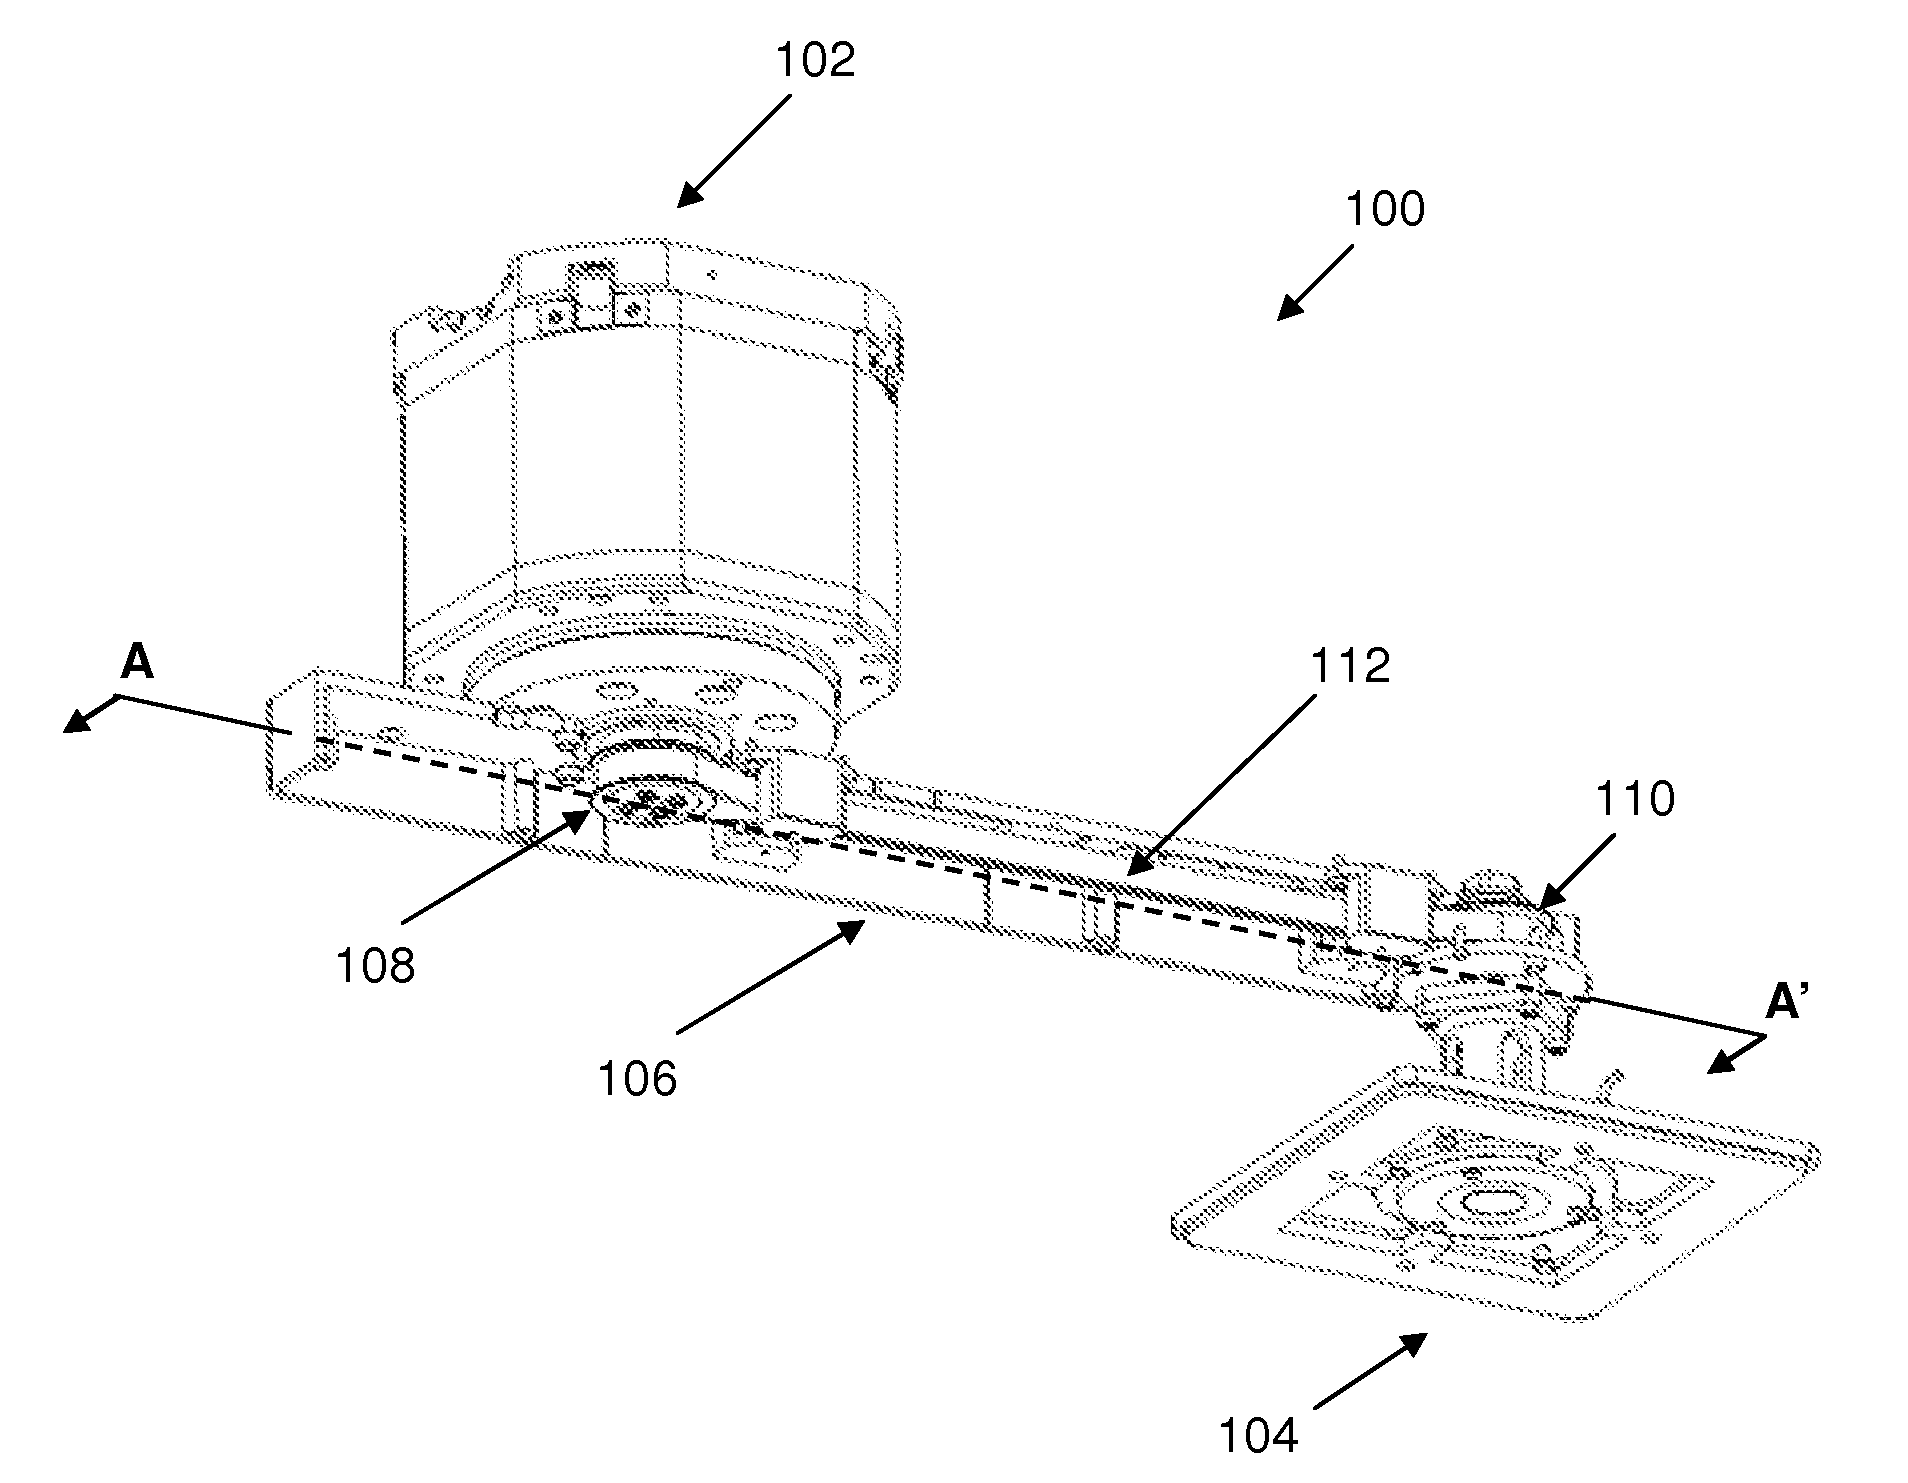 Apparatus for transferring a solar wafer or solar cell during its fabrication